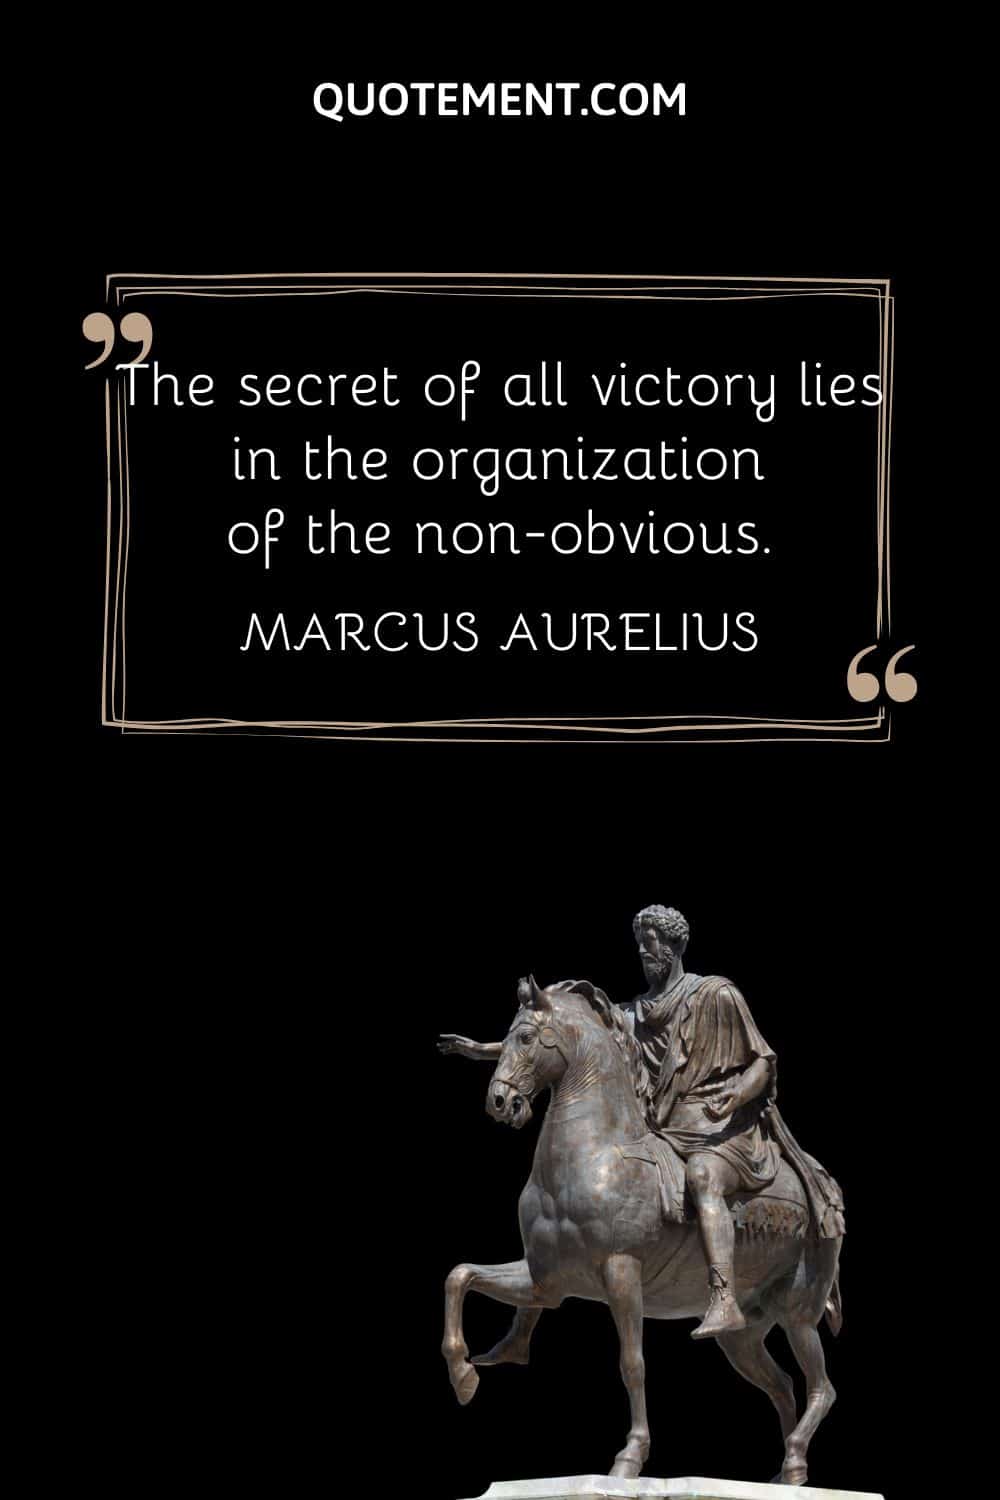 “The secret of all victory lies in the organization of the non-obvious.” — Marcus Aurelius